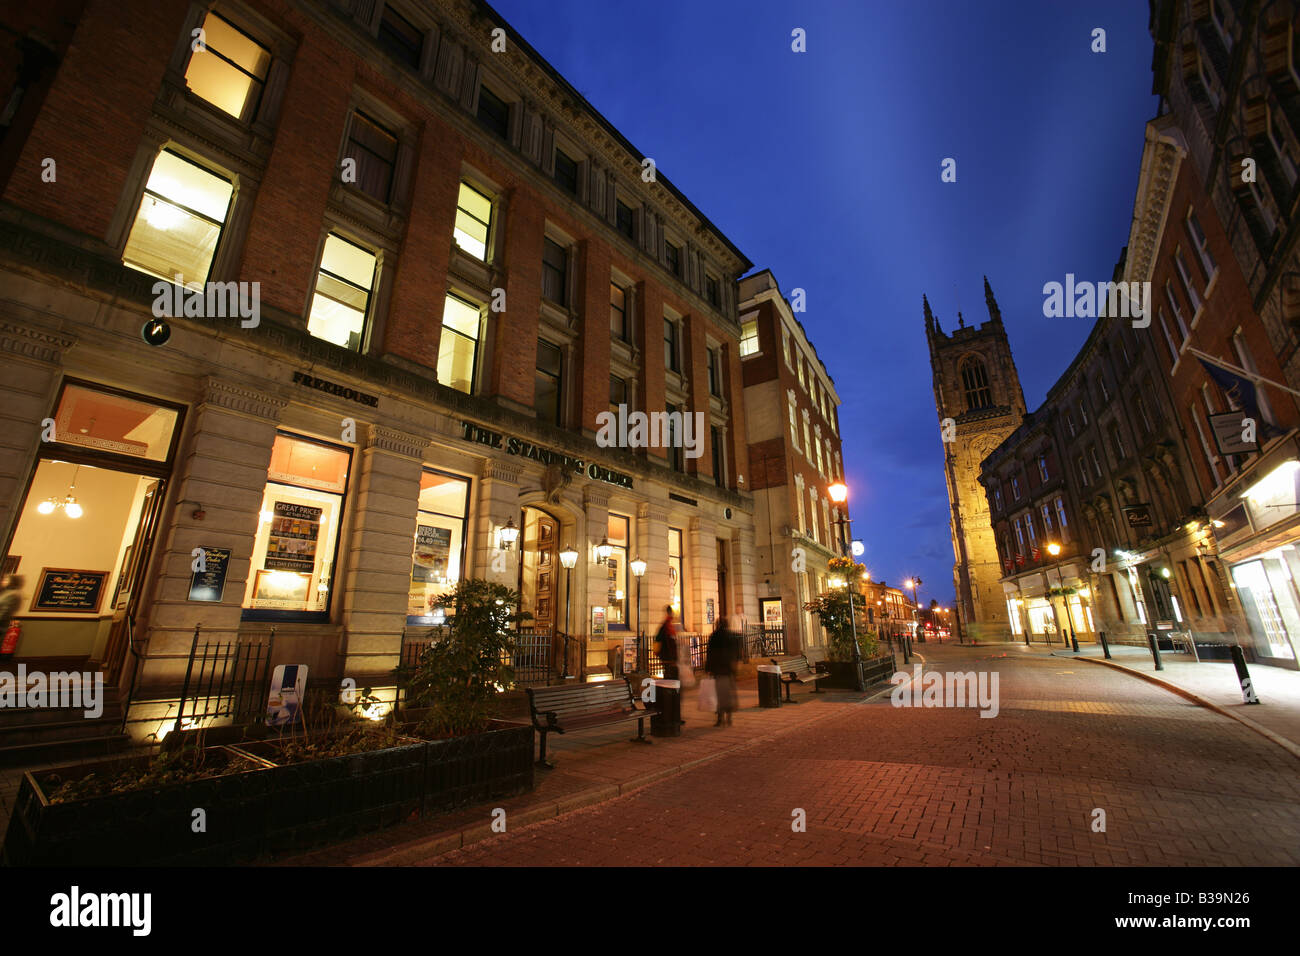 City of Derby, England. Night view Iron Gate properties and architecture, with Derby All Saints’ Cathedral in the background. Stock Photo